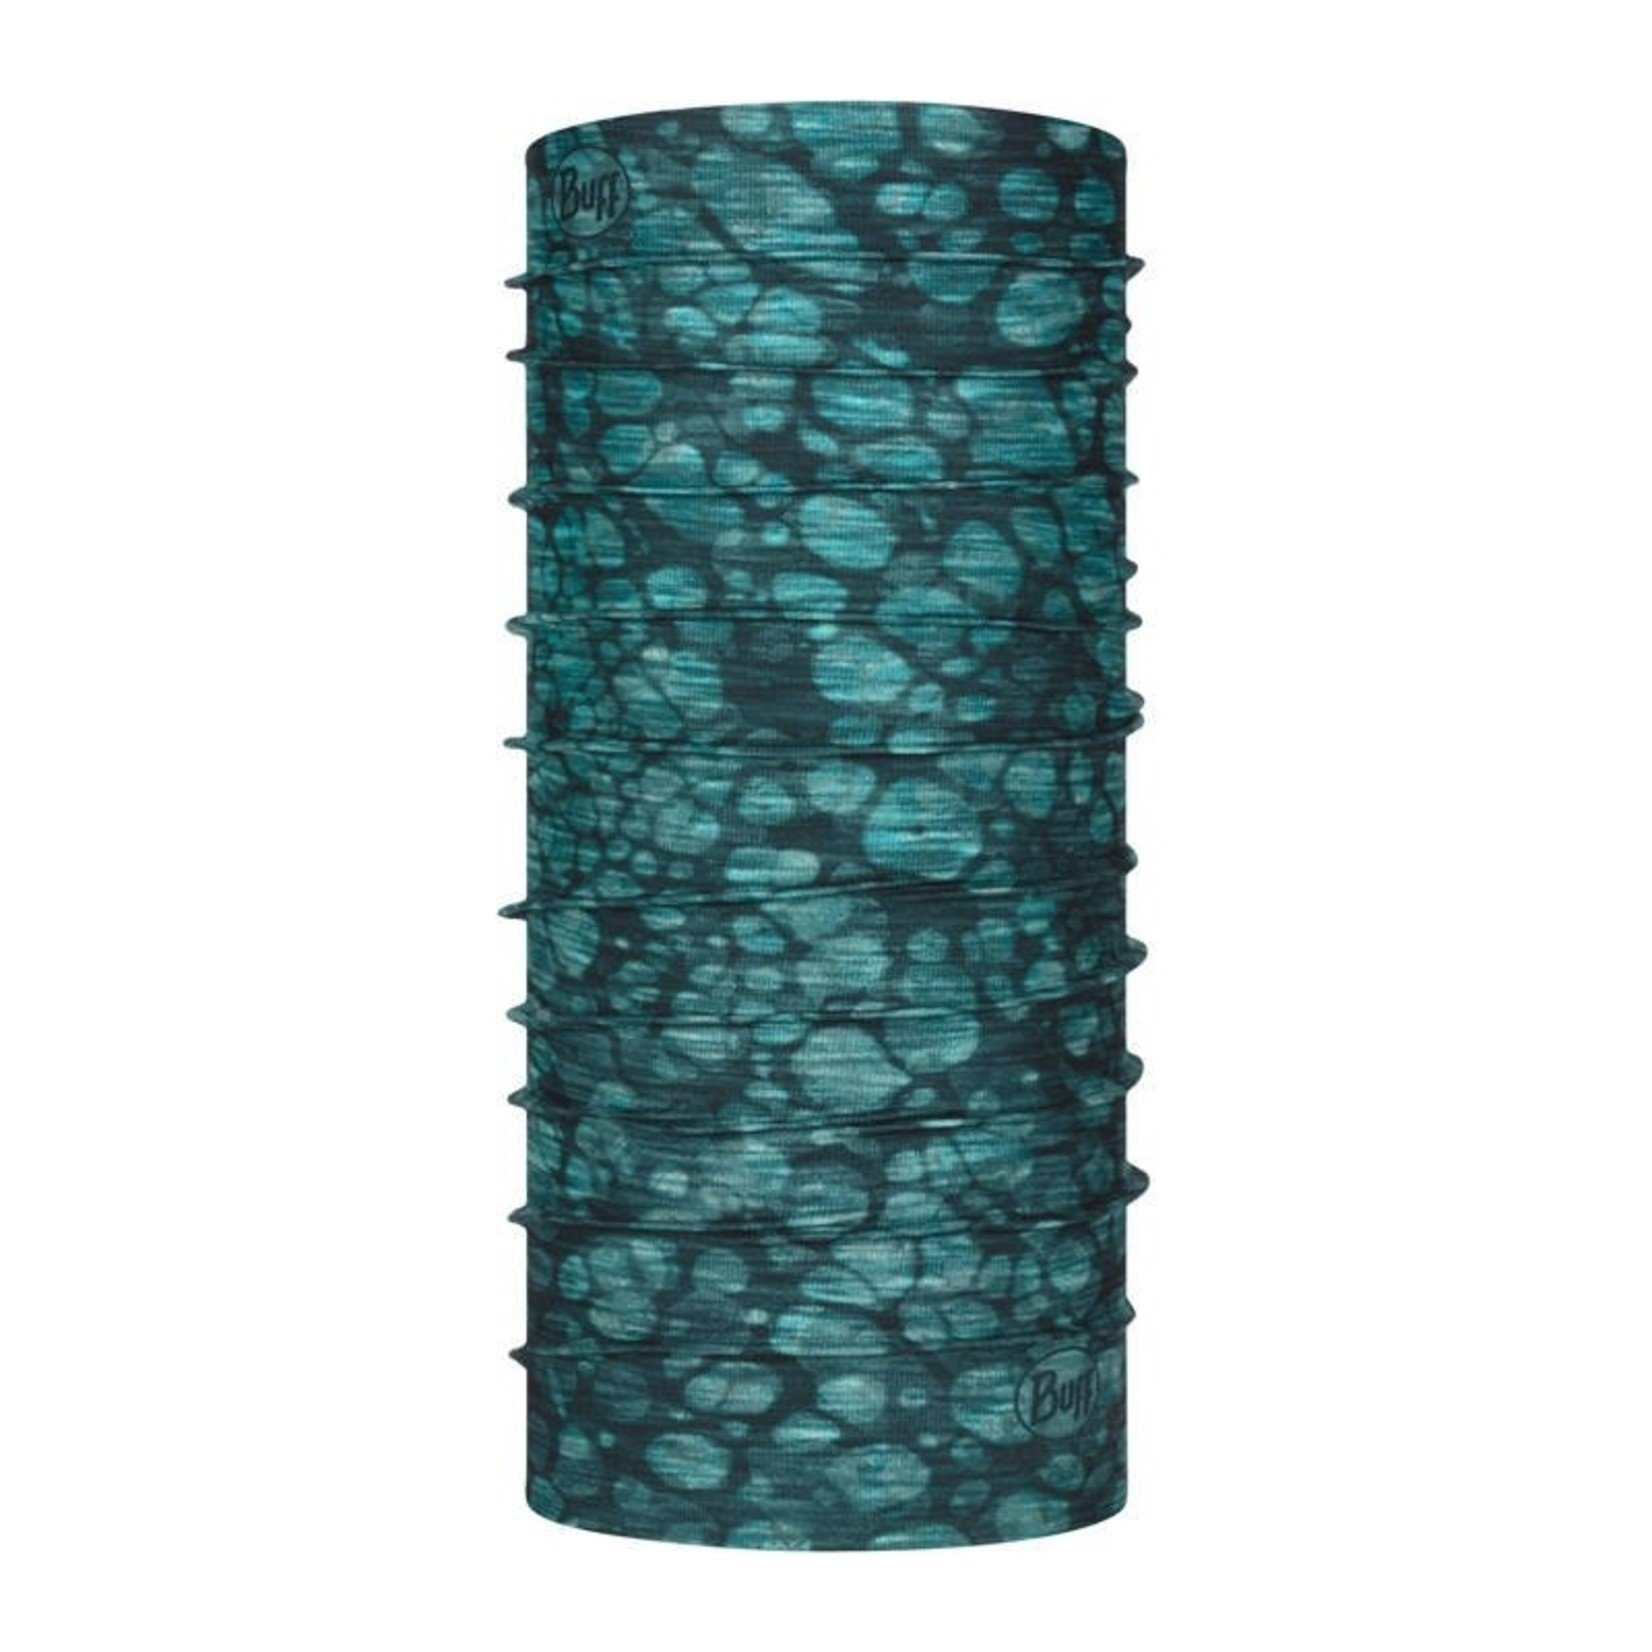 Buff Ecostretch Halcyon Turquoise